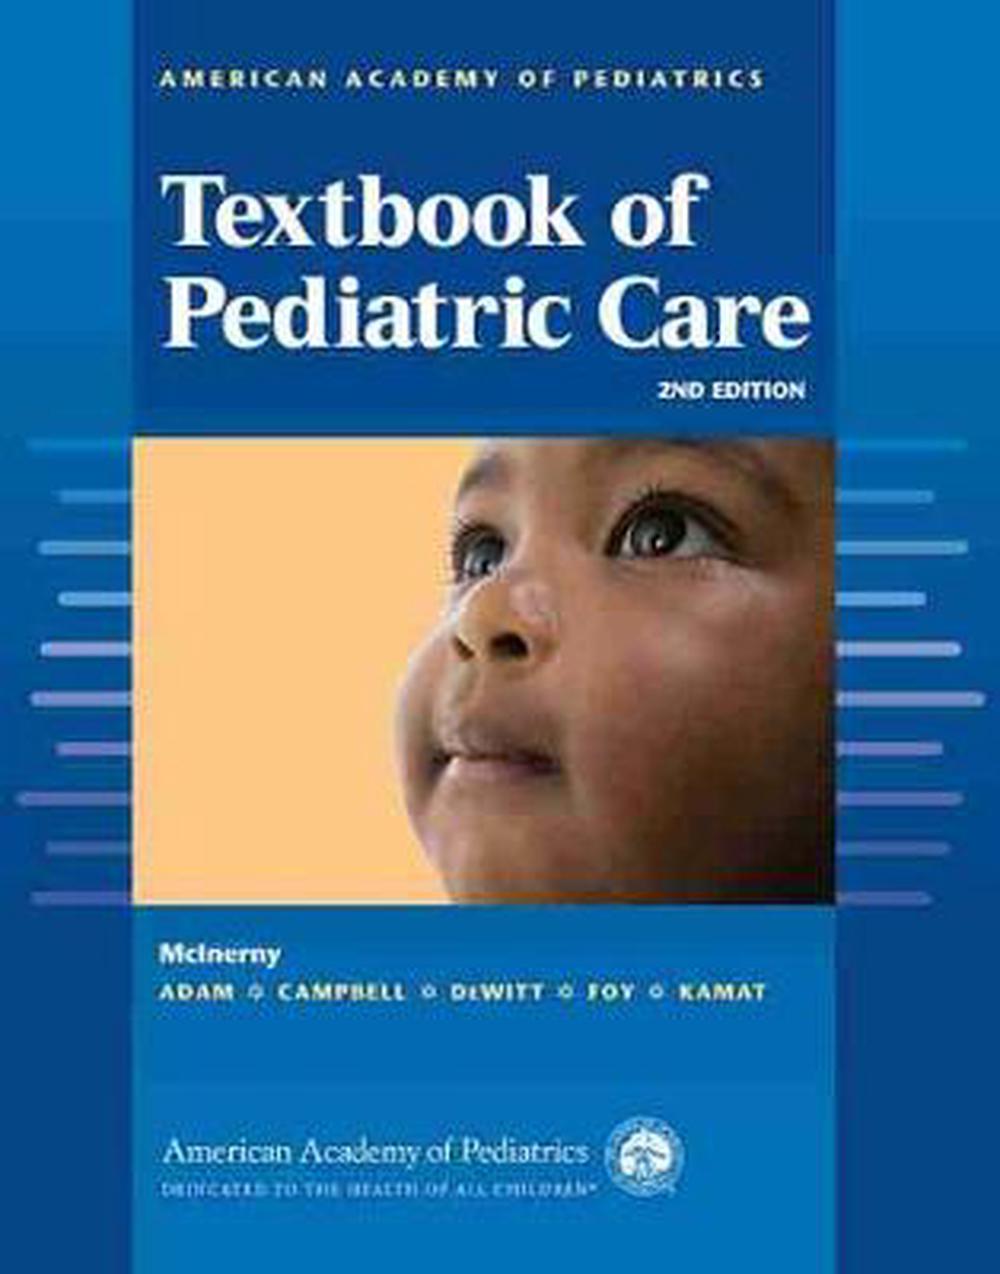 What does pediatrics cover?